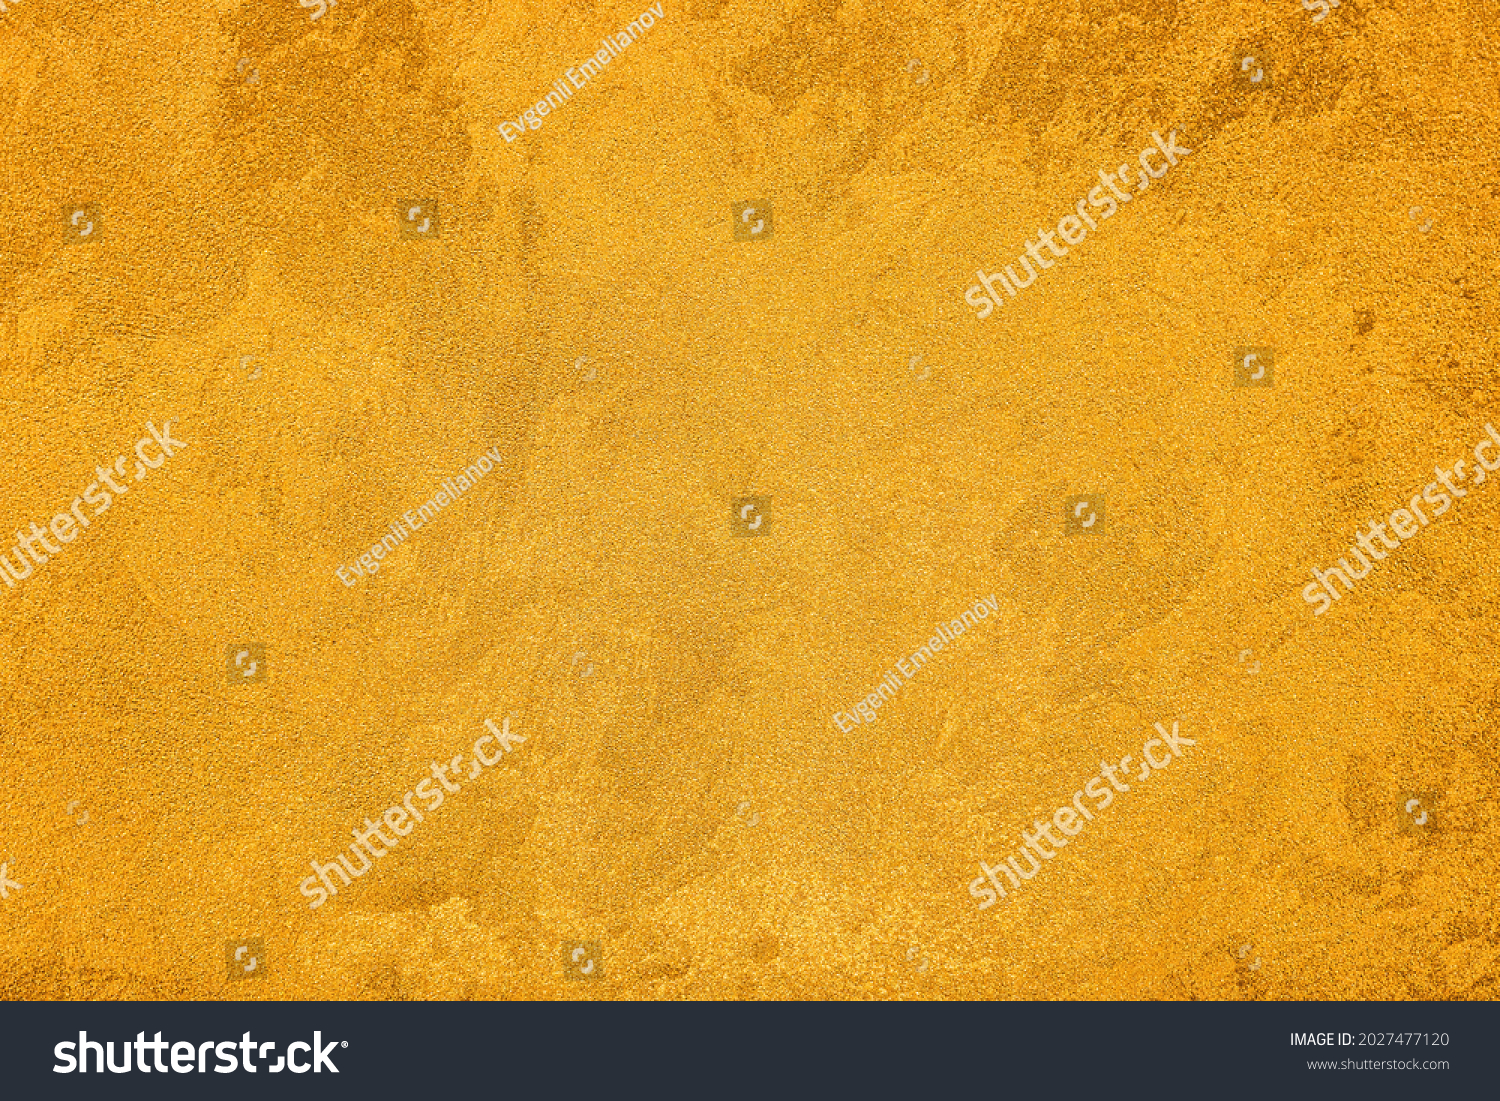 Texture of golden decorative plaster or concrete. Abstract grunge background for design. #2027477120